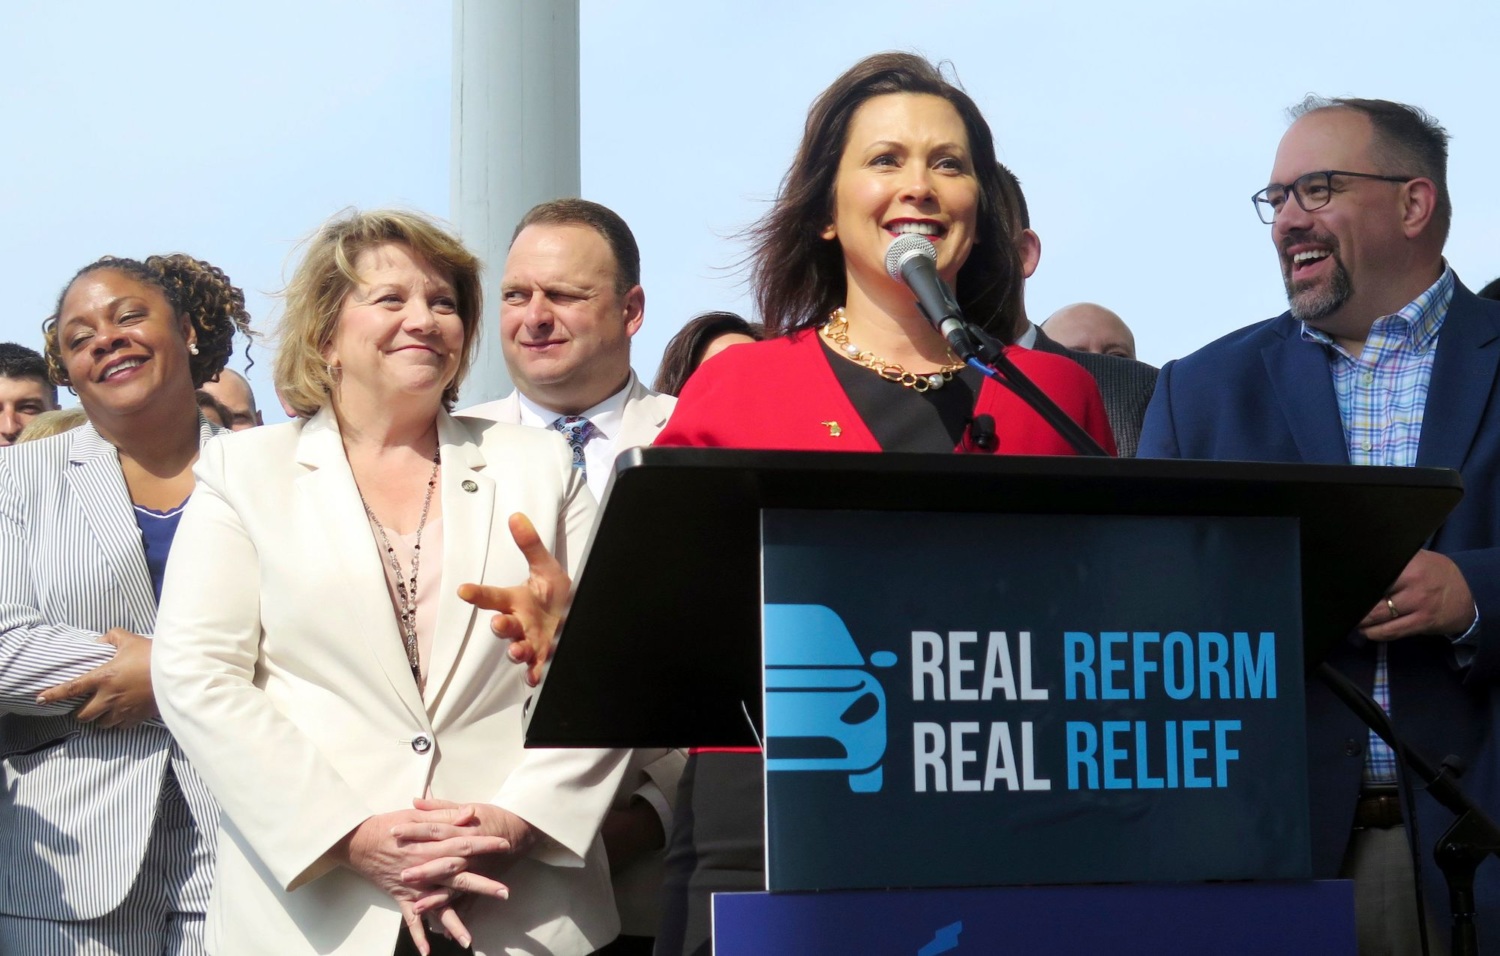 Whitmer Highlights Record of Working With Both Parties to Create Jobs, Cut Taxes, and Lower Rx Drug Costs